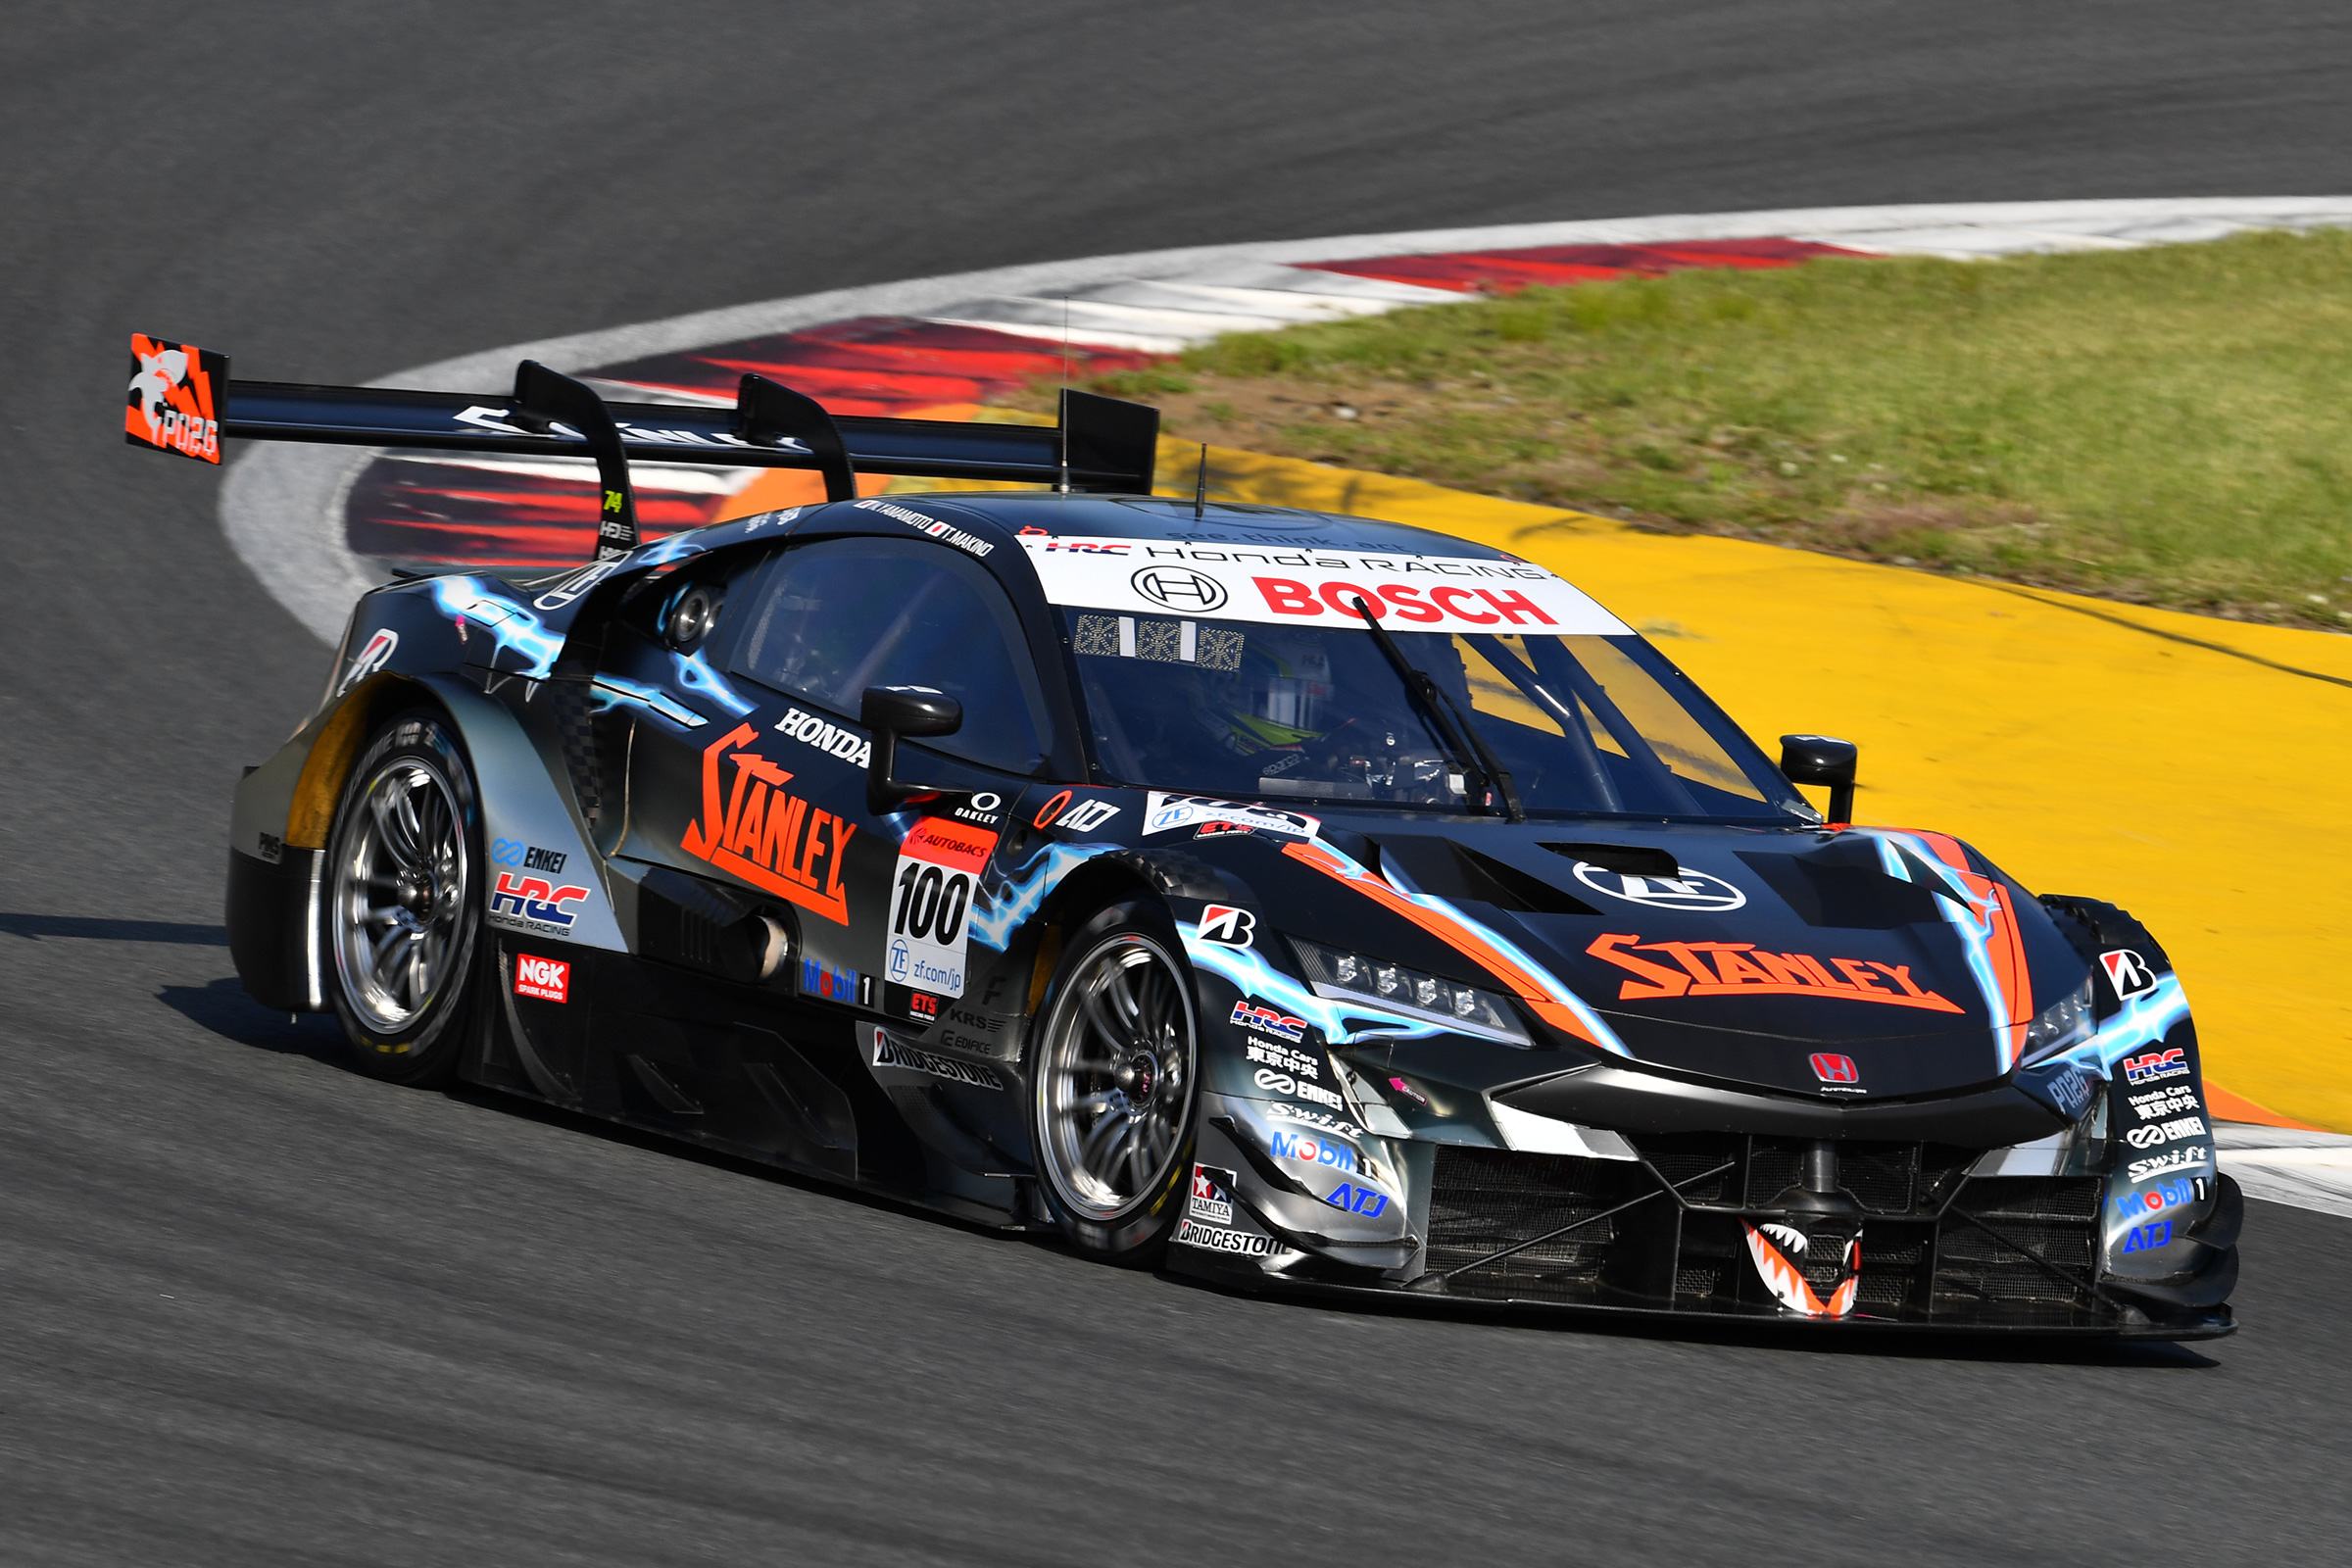 The STANLEY NSX-GT wins pole position in view of a beautiful Mt